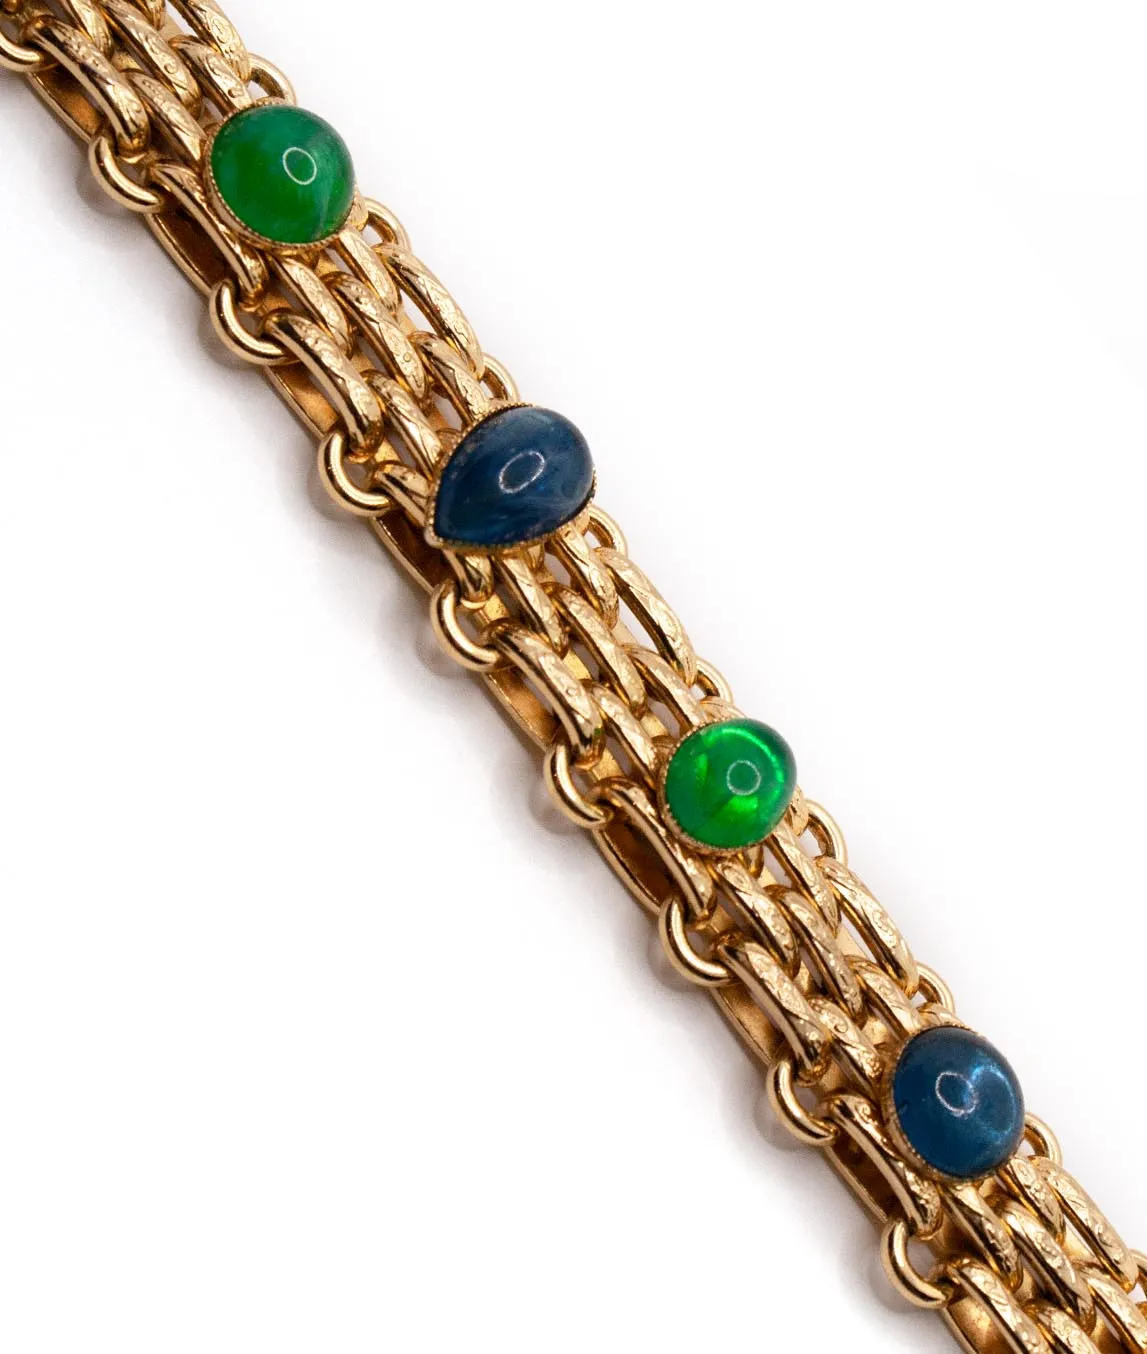 Top view of green and blue poured glass gems on gold link bracelet by Christian Dior